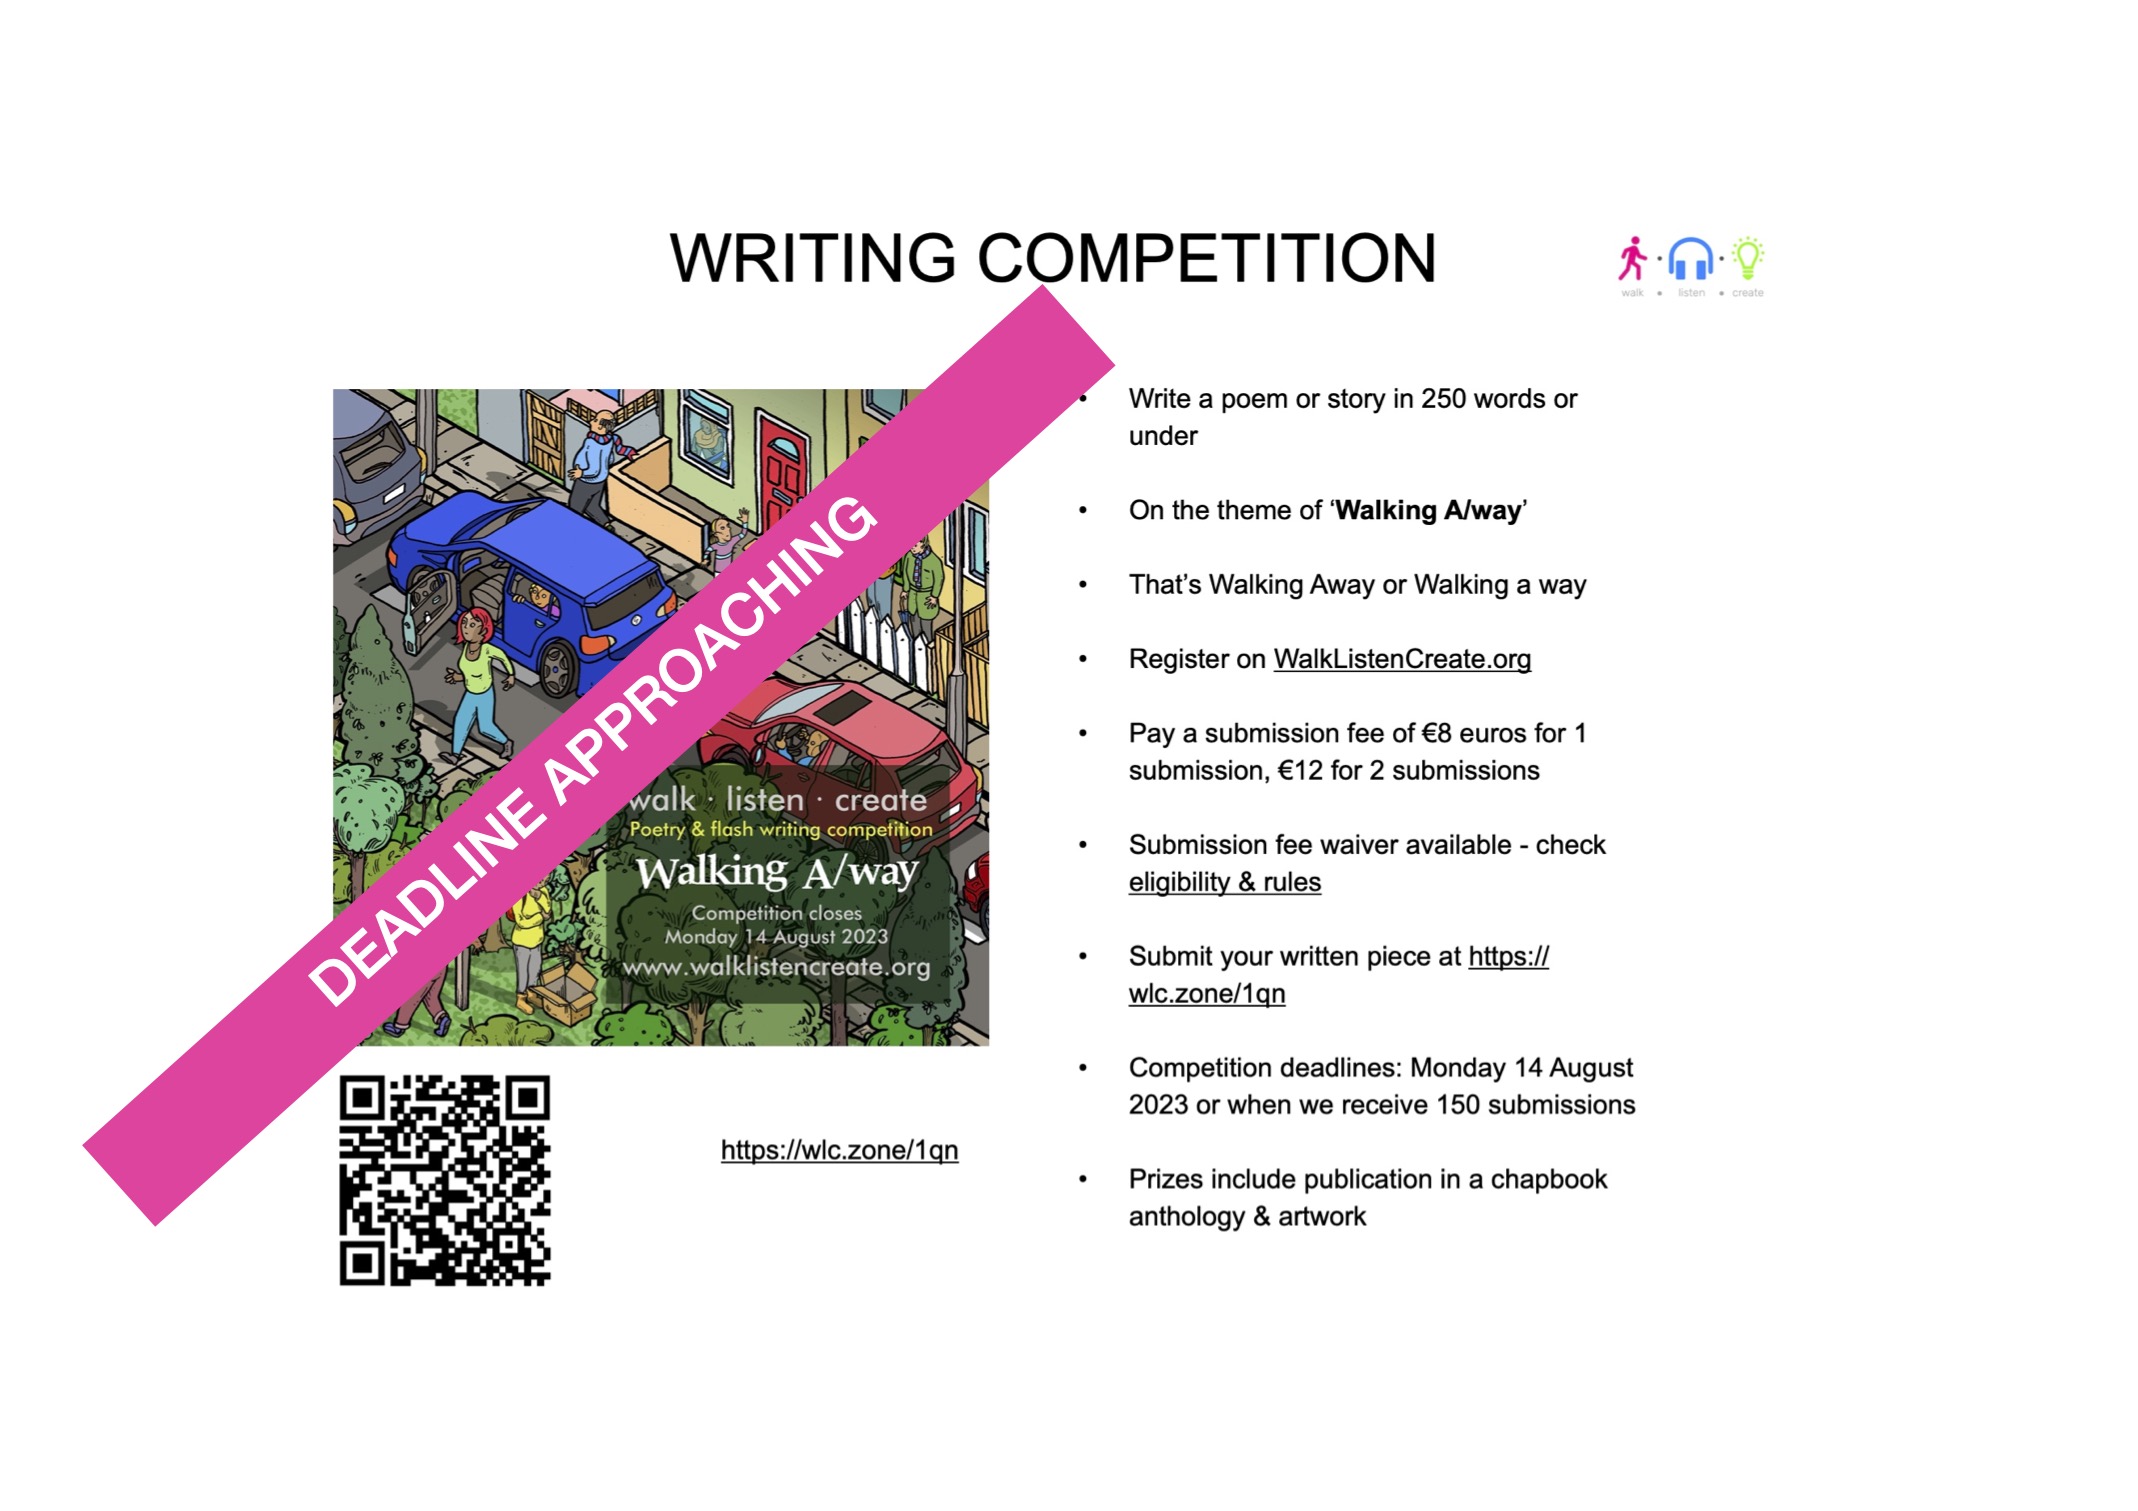 DEADLINE APPROACHING FOR WRITING COMPETITION